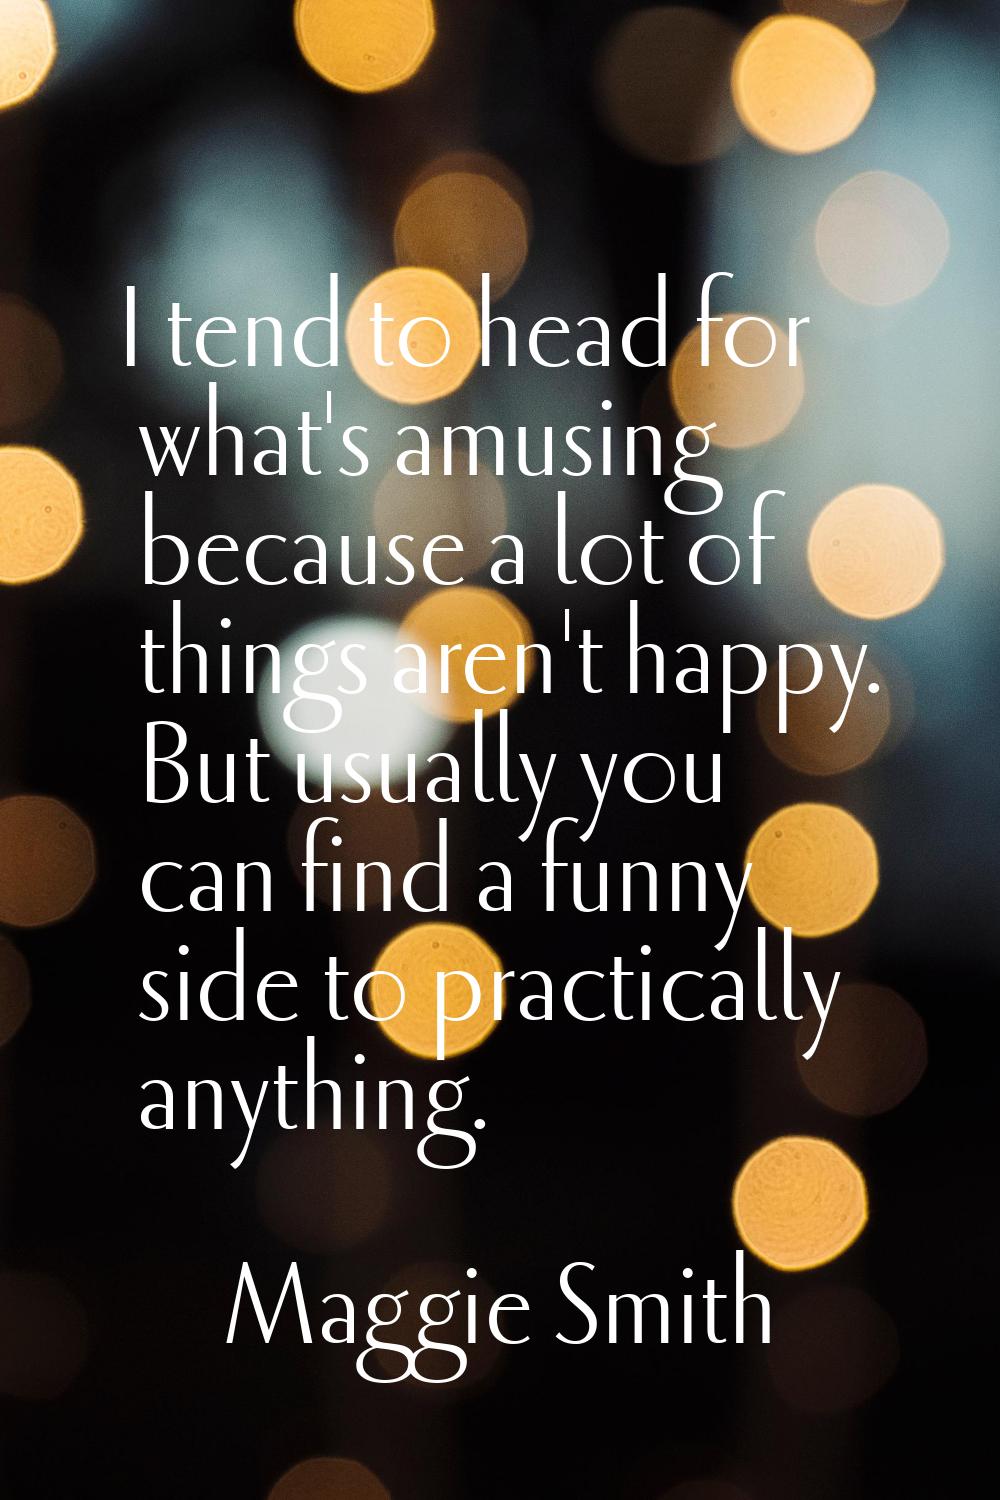 I tend to head for what's amusing because a lot of things aren't happy. But usually you can find a 